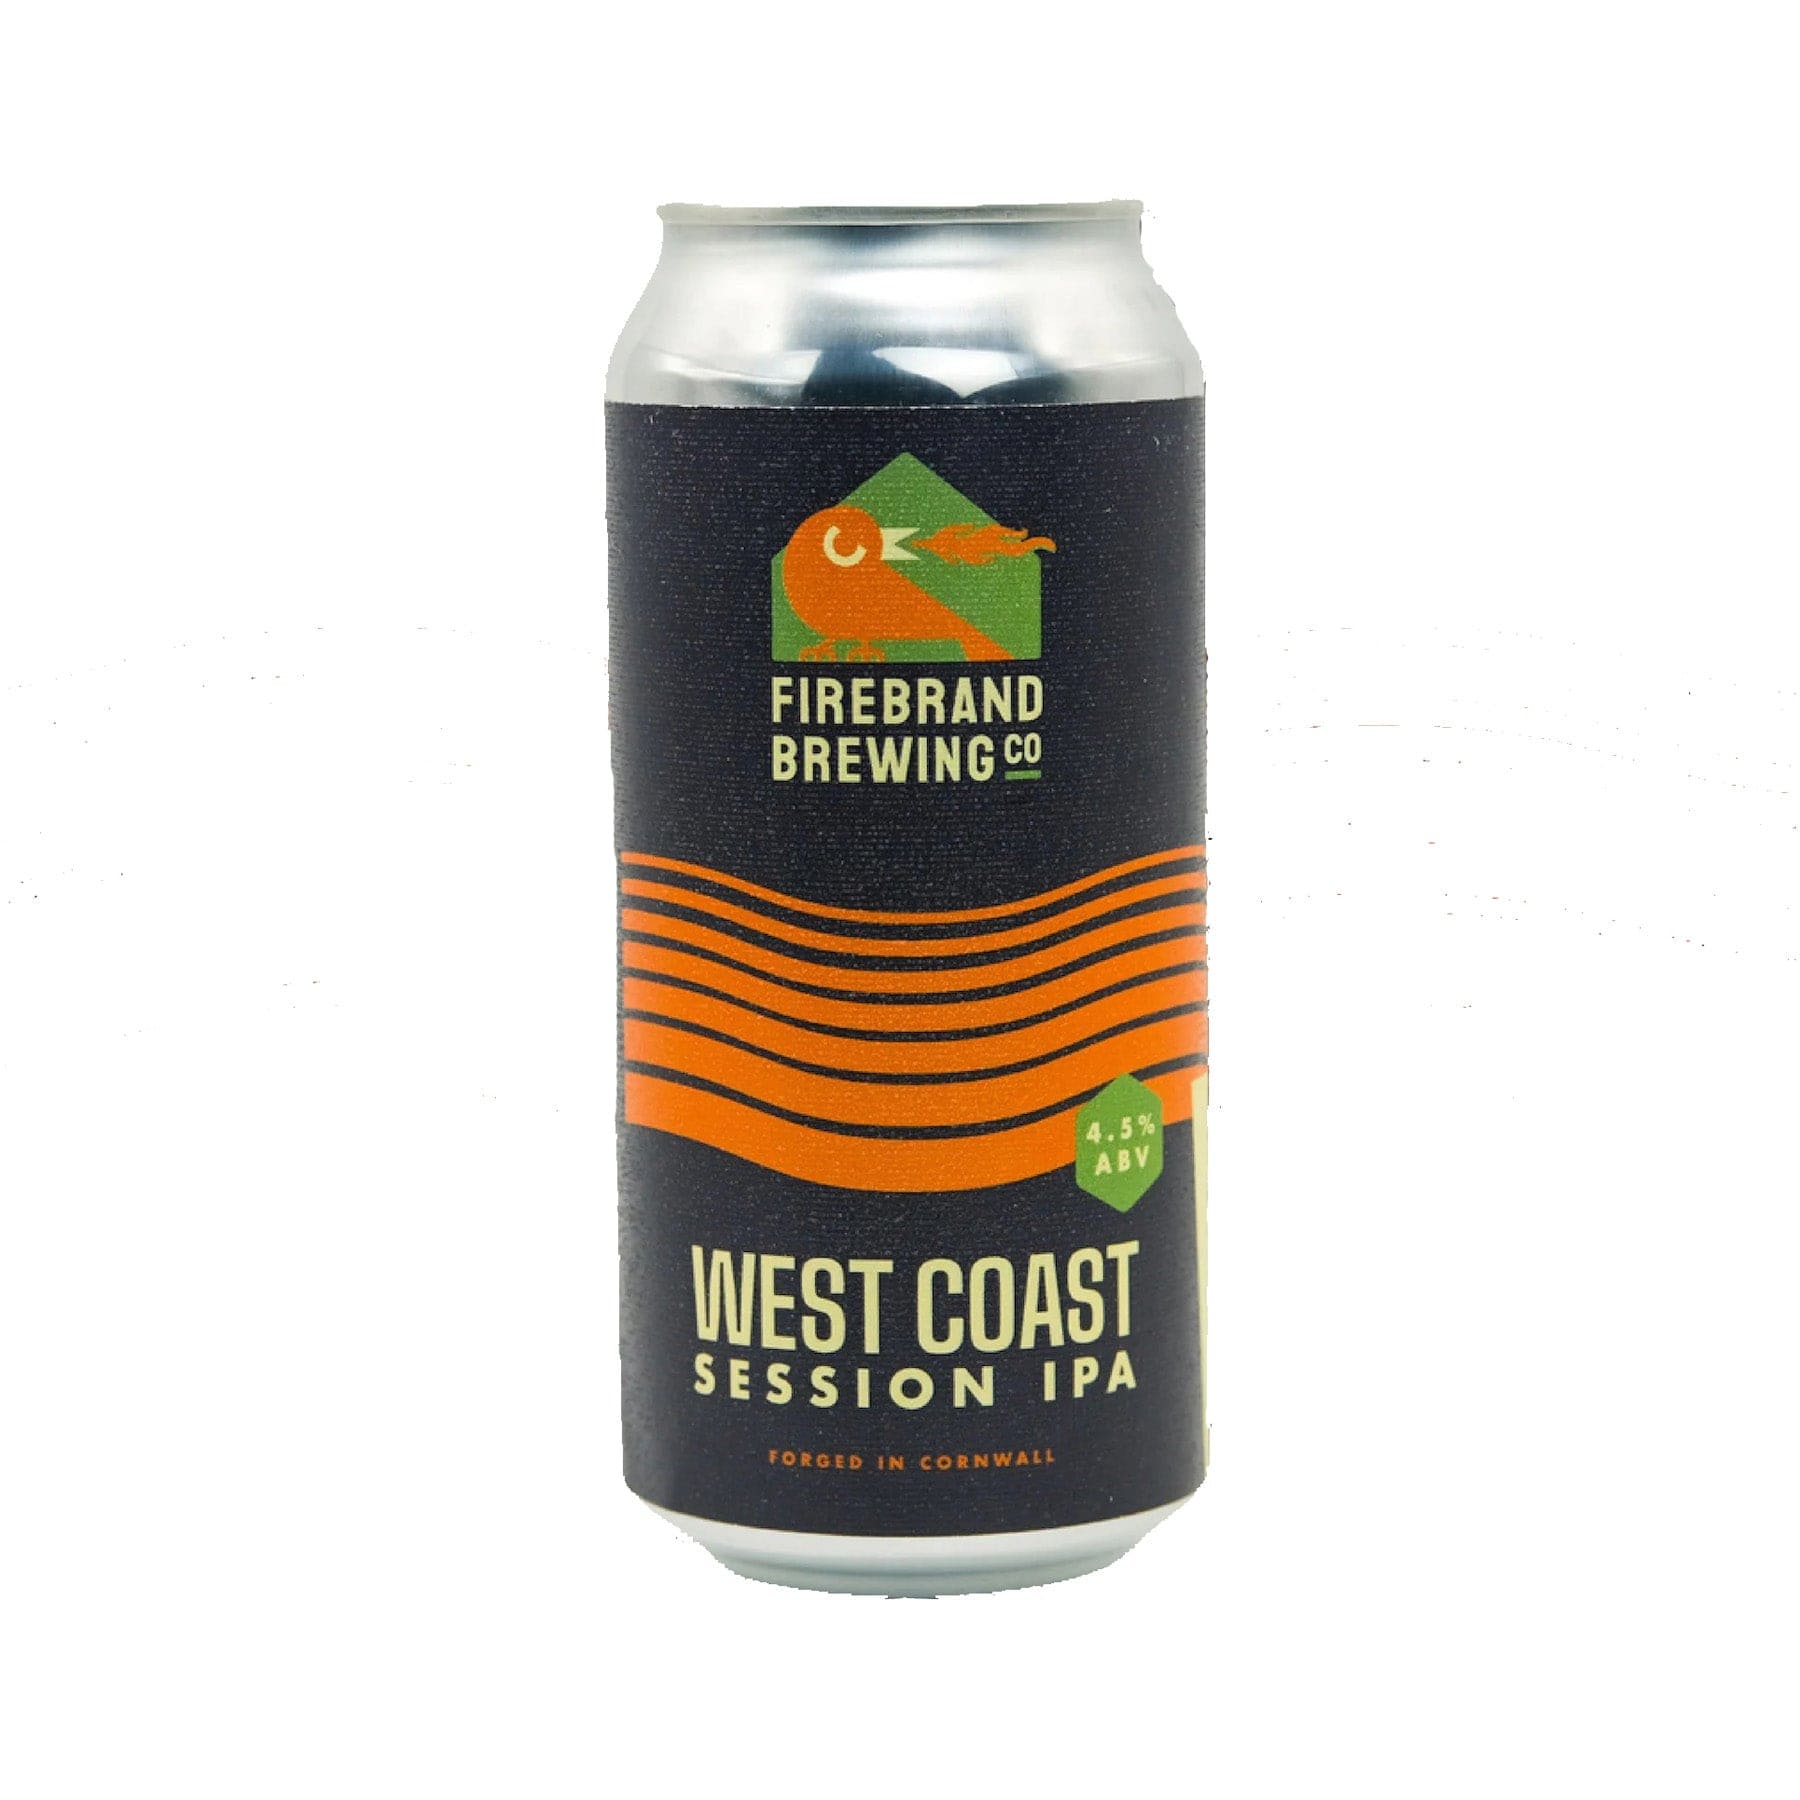 Firebrand Brewing Co West Coast Session IPA craft beer can with logo and orange wave design on a white background